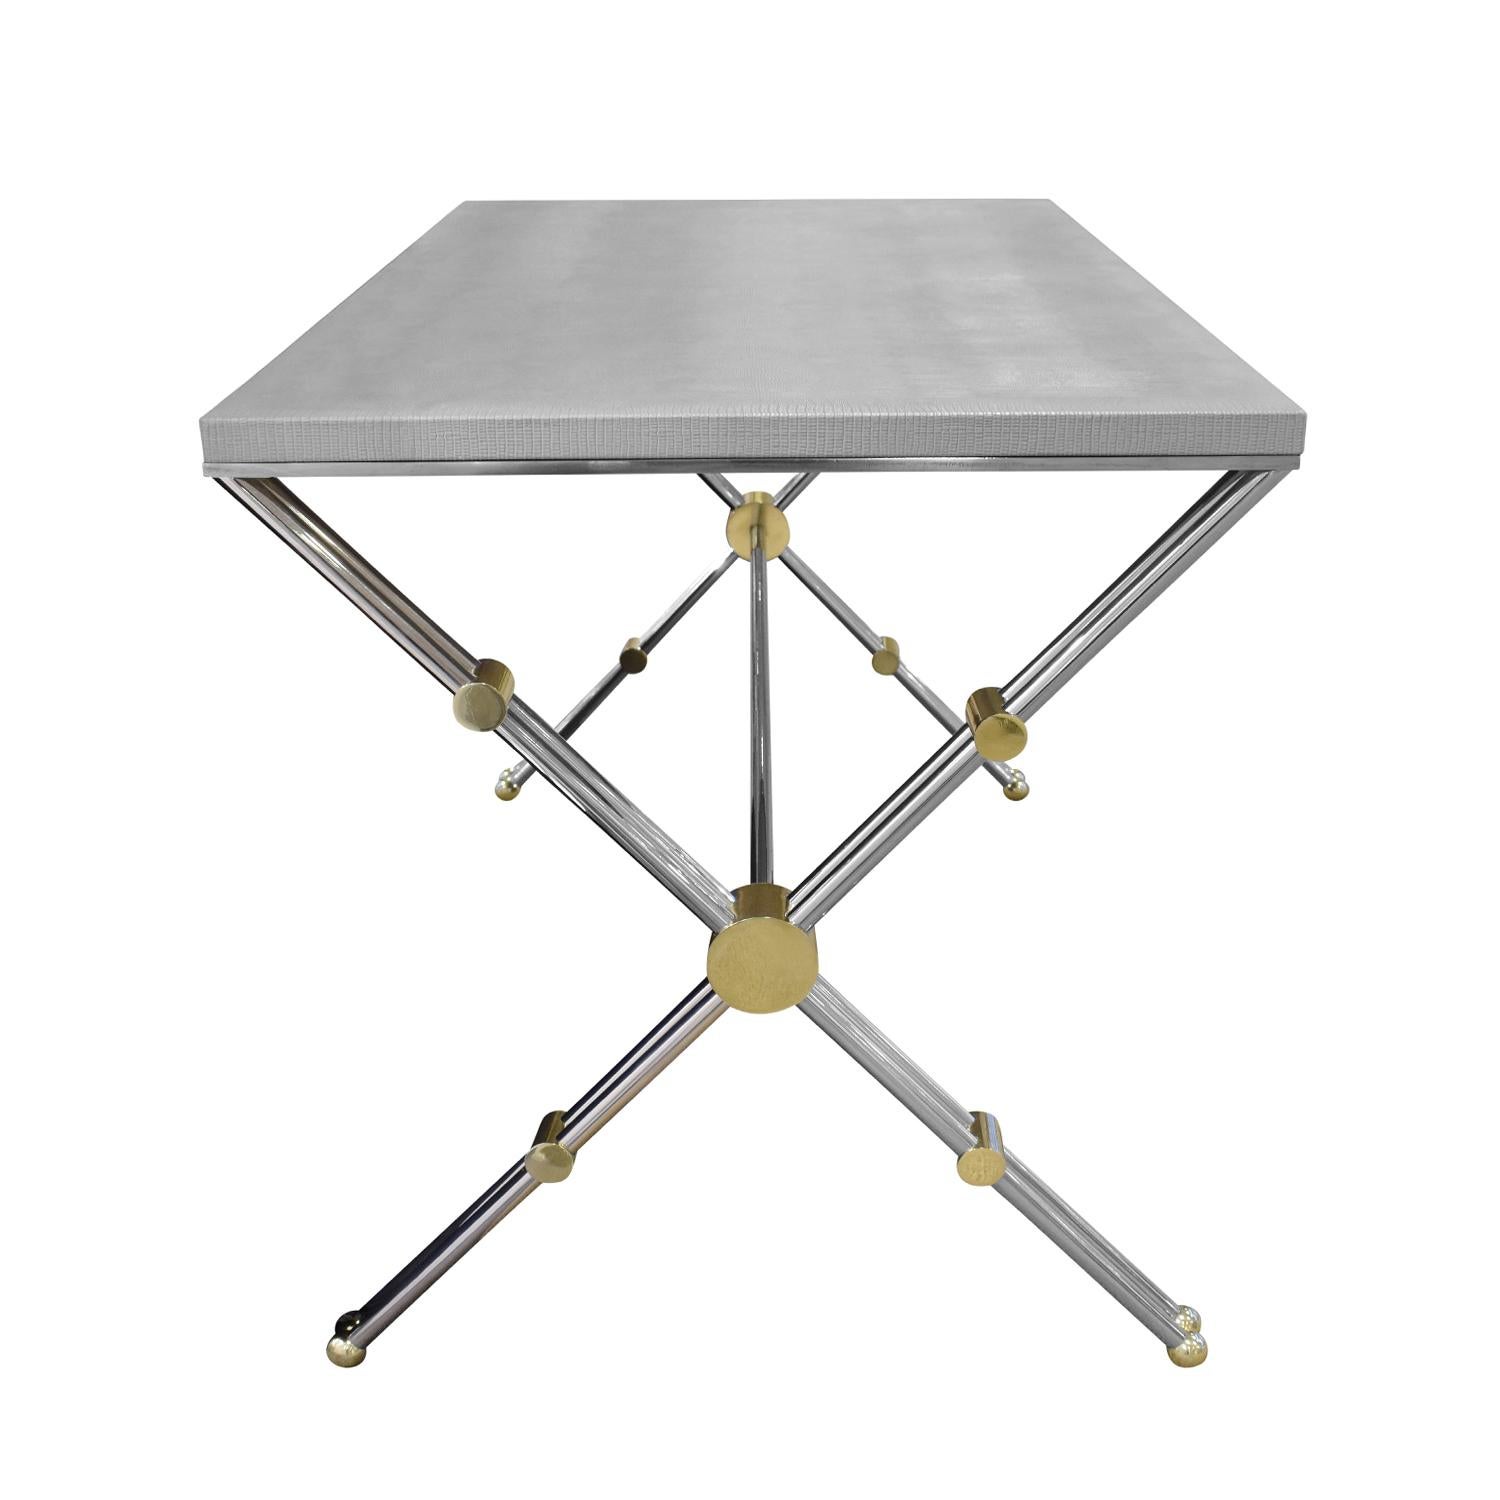 Modern John Vesey Desk in Stainless Steel and Brass with Embossed Leather Top, 1970s